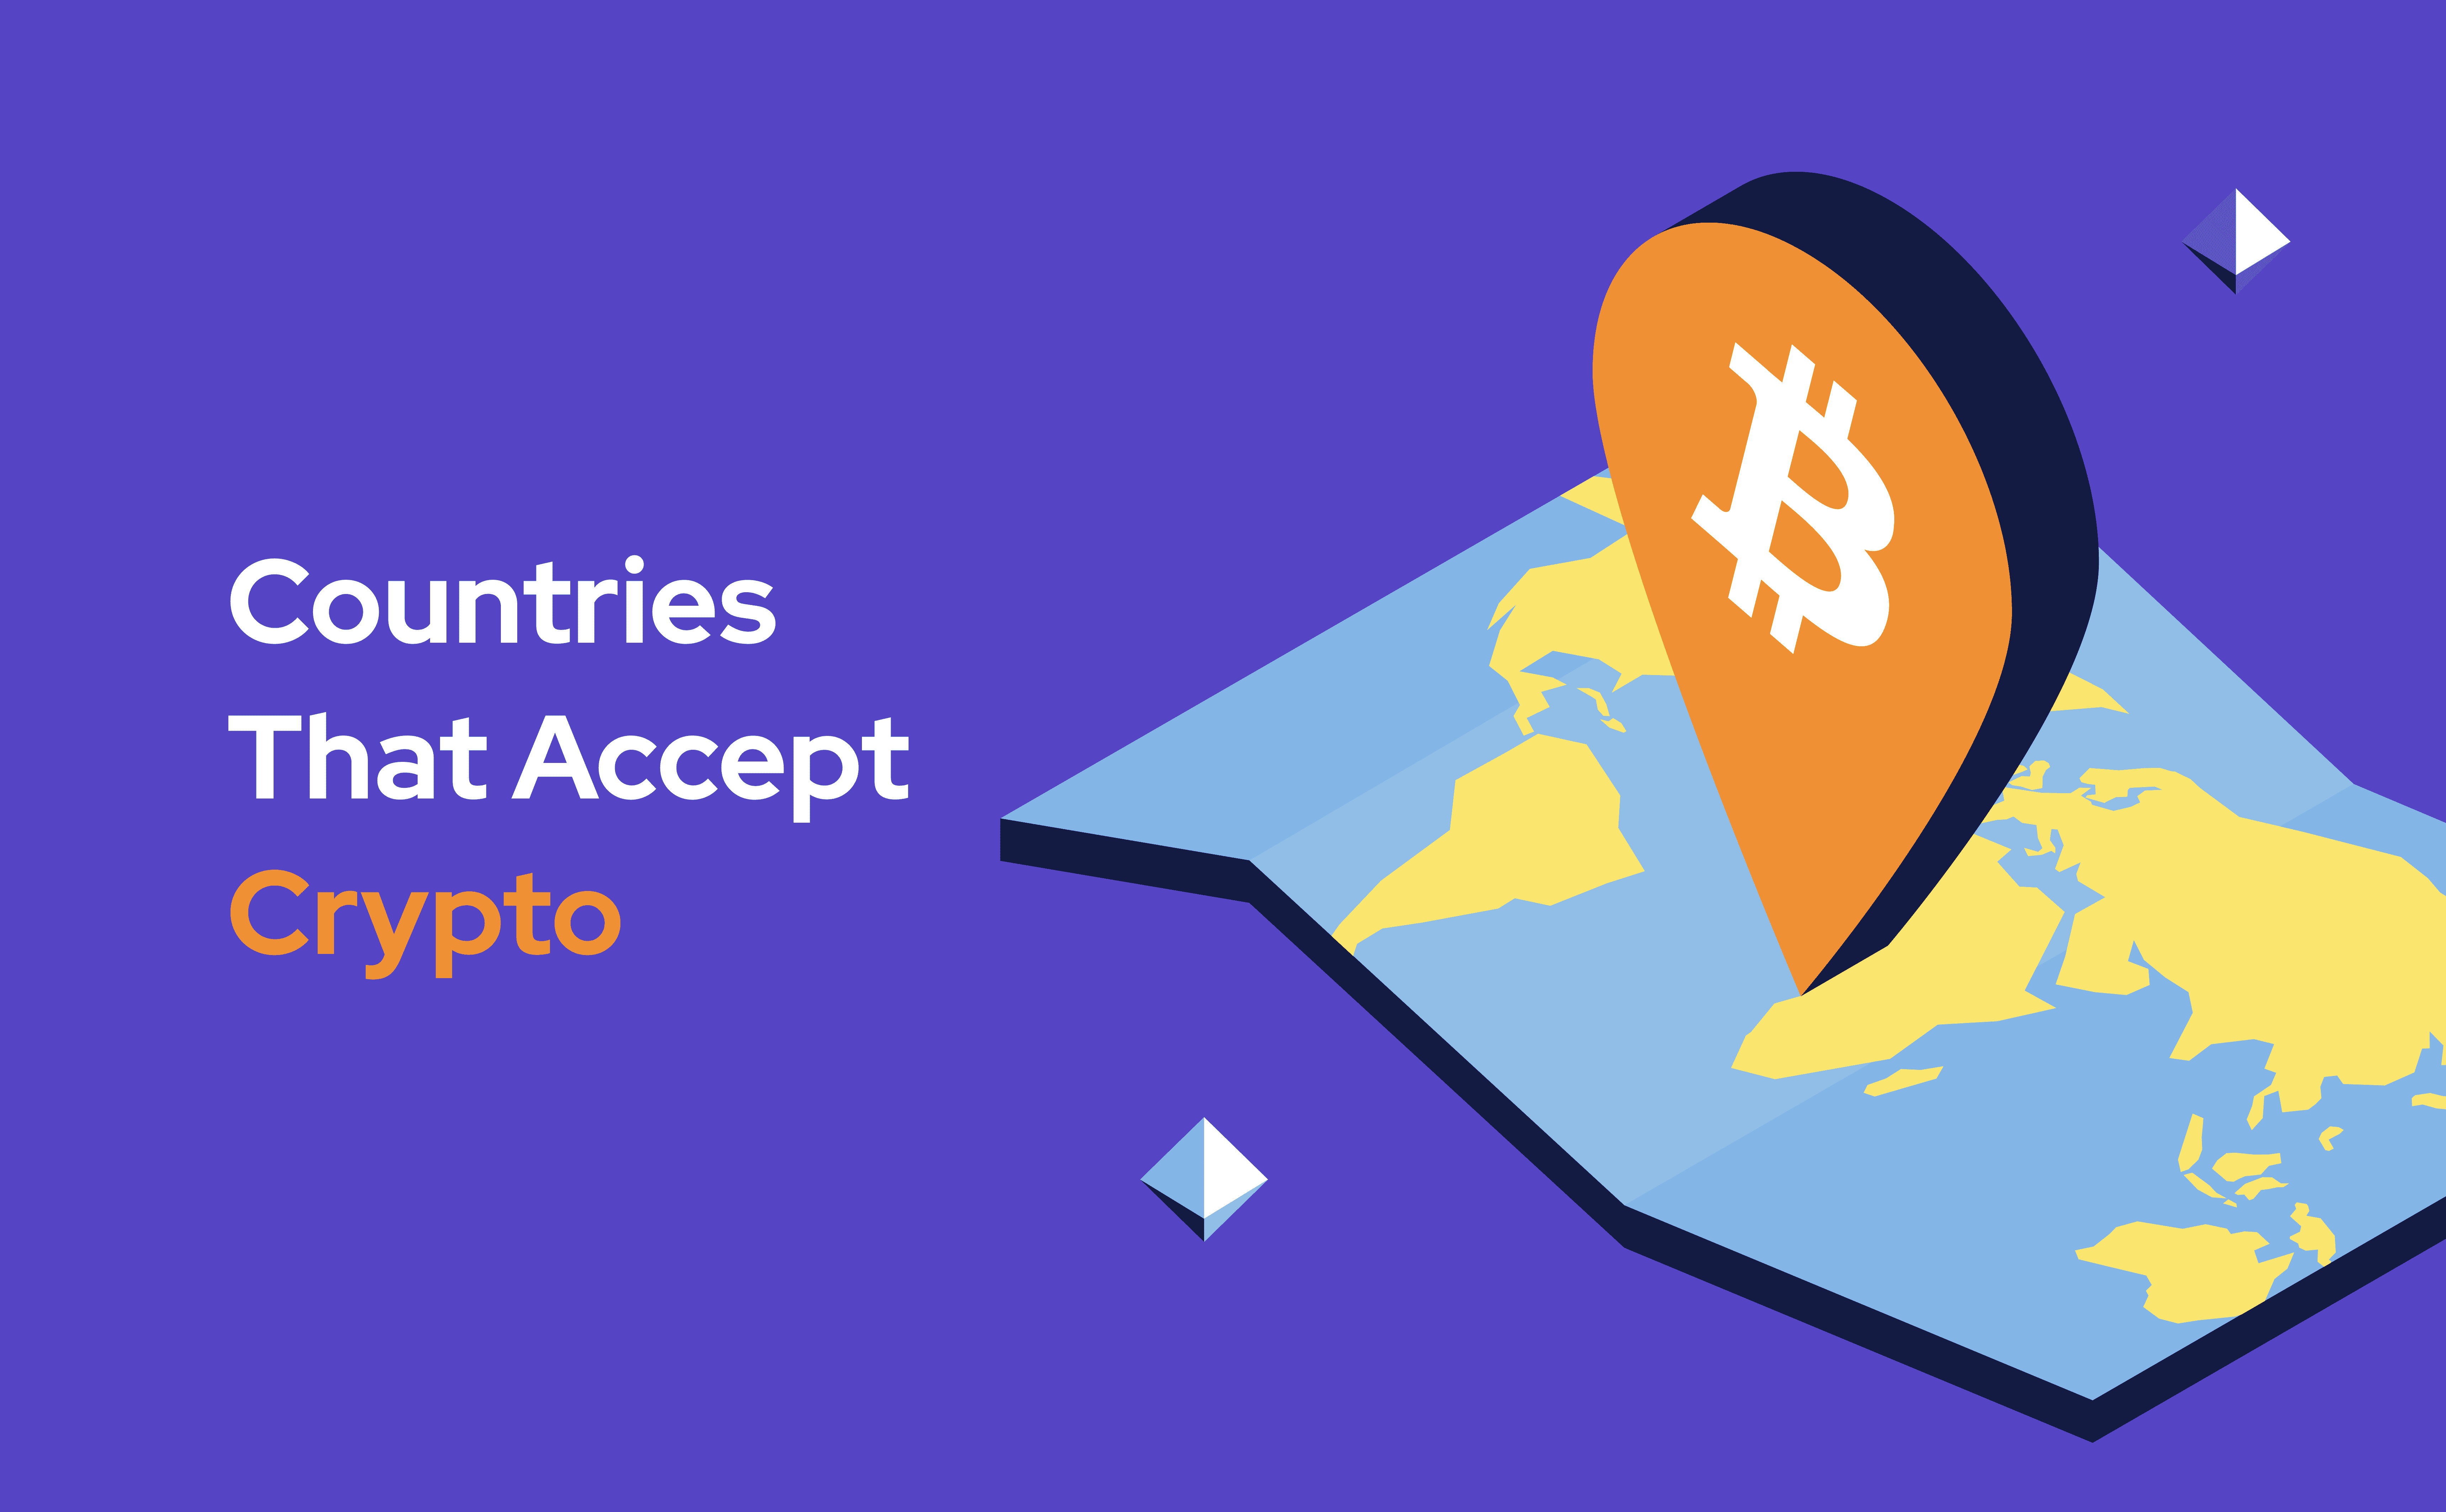 Countries that accept Bitcoin